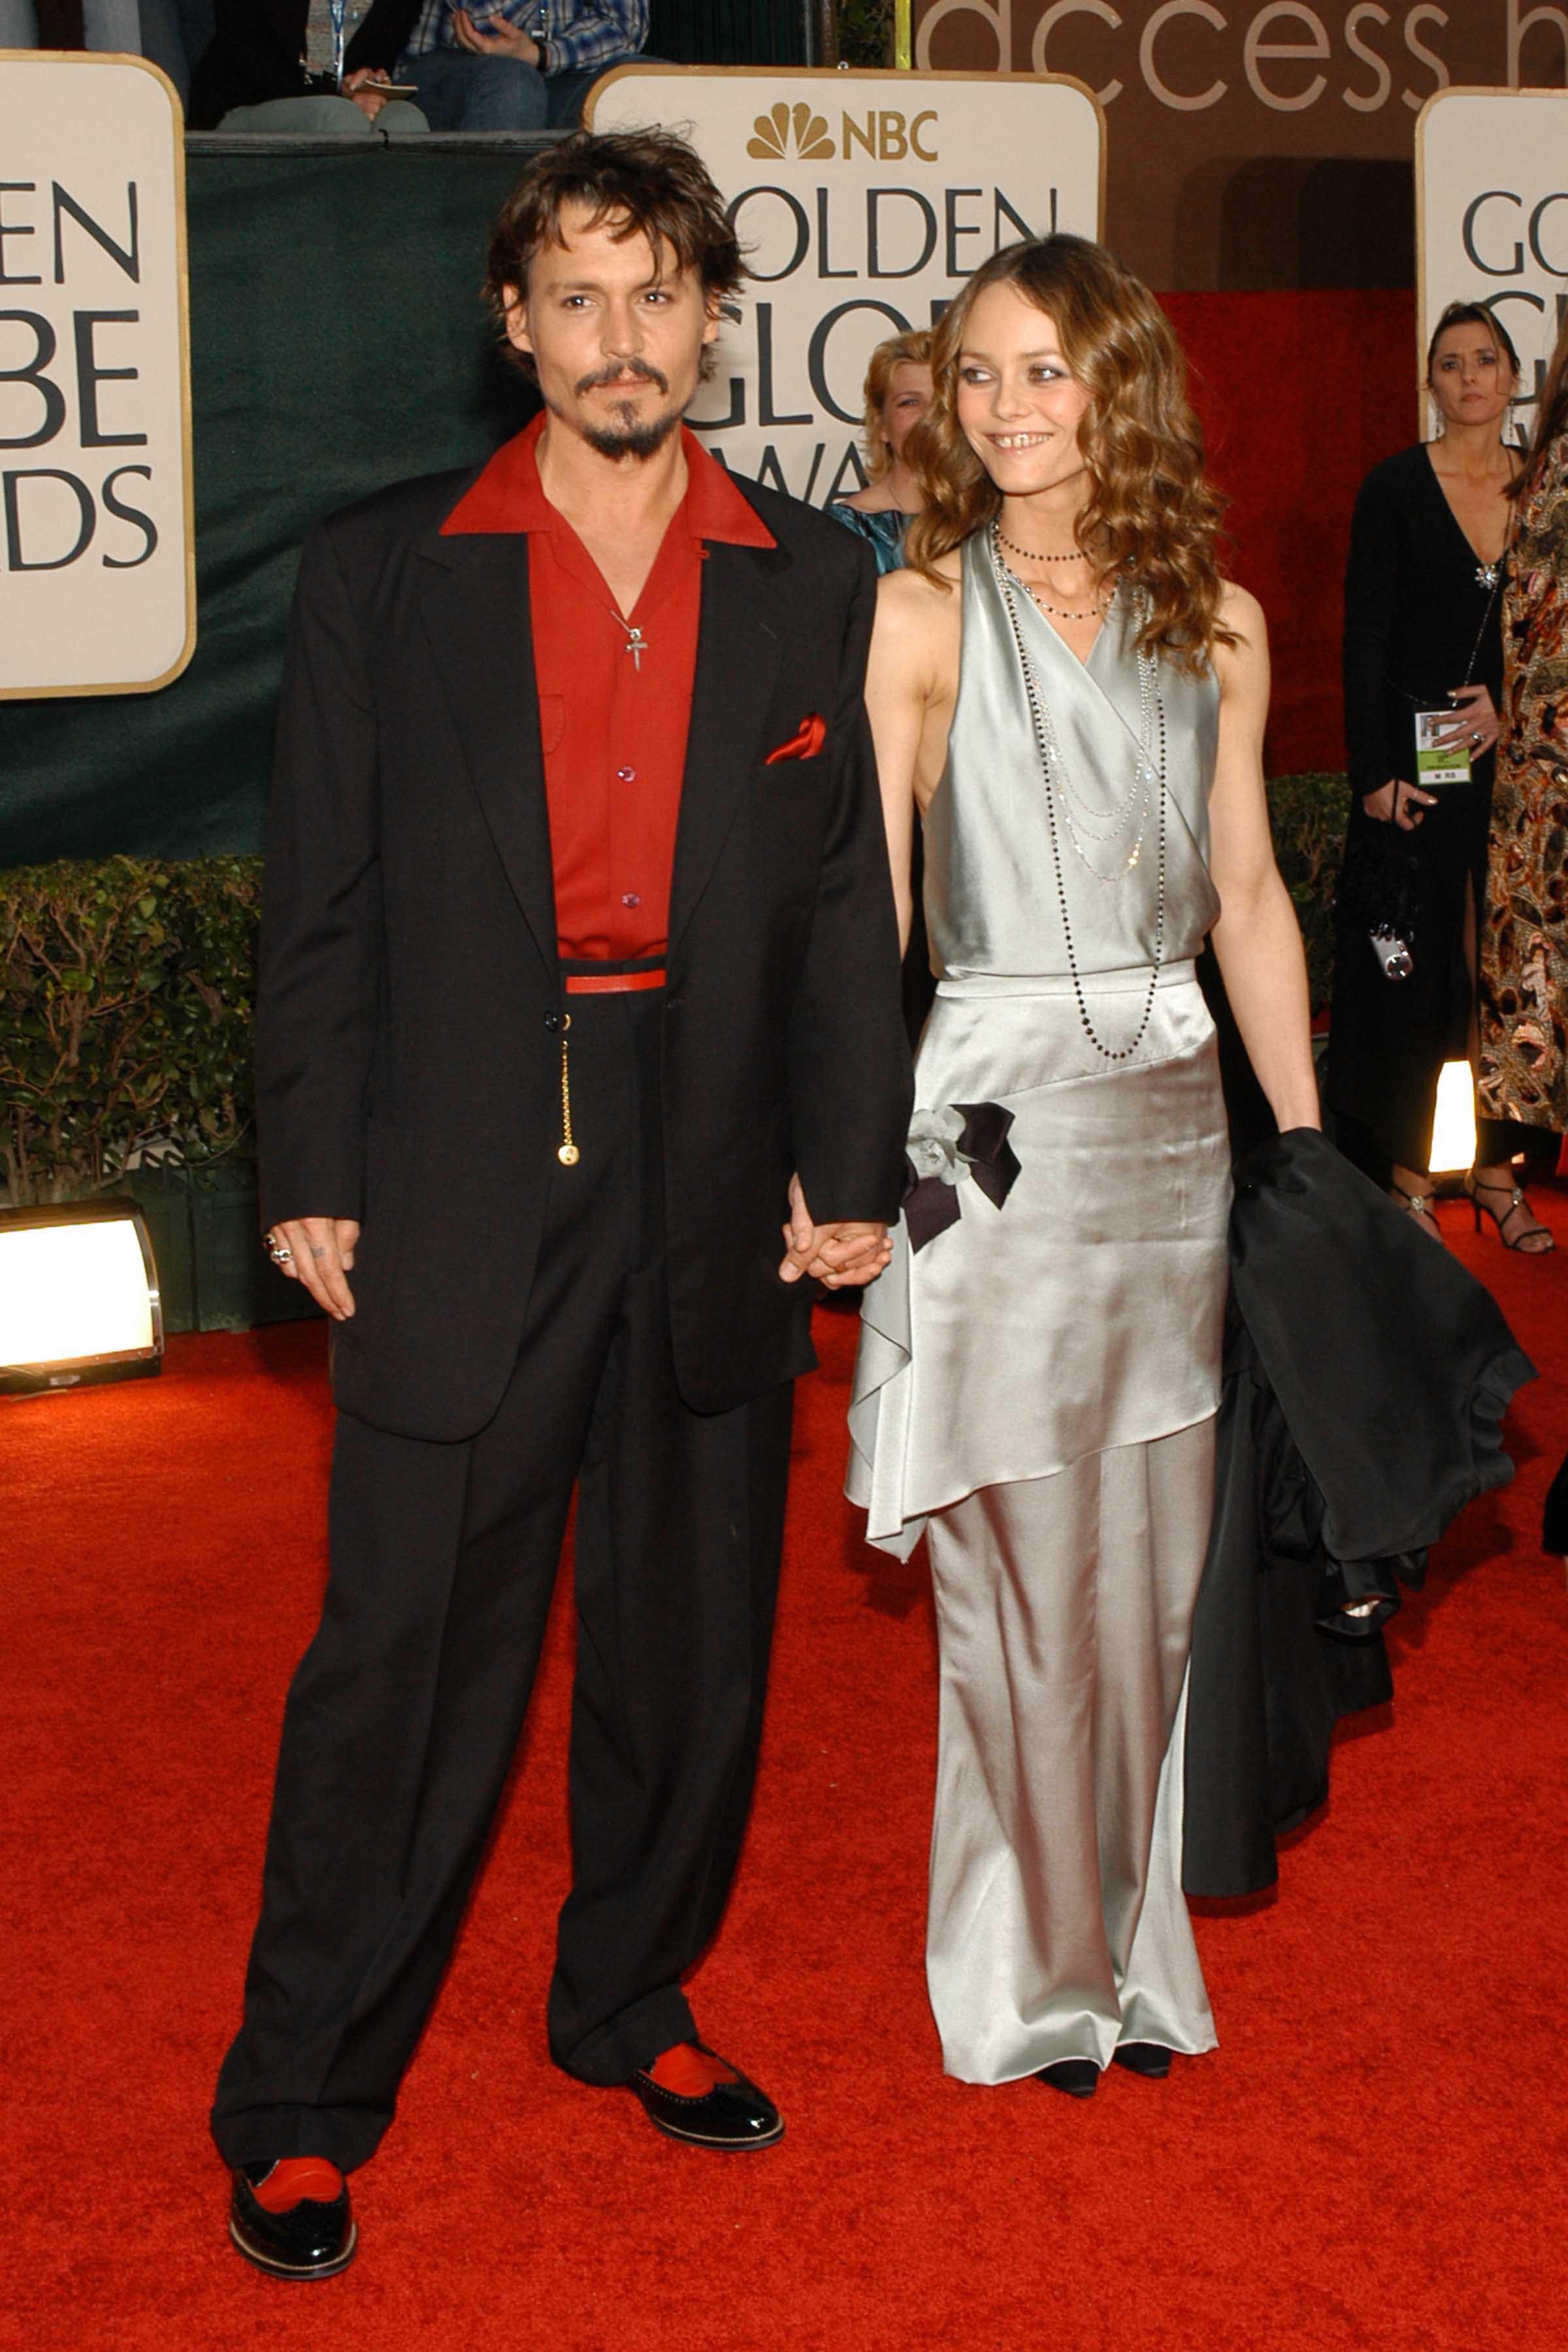 Johnny Depp and Vanessa Paradis at the 63rd Annual Golden Globe Awards on January 16, 2006, in Beverly Hills, California. | Source: Stefanie Keenan/Patrick McMullan/Getty Images